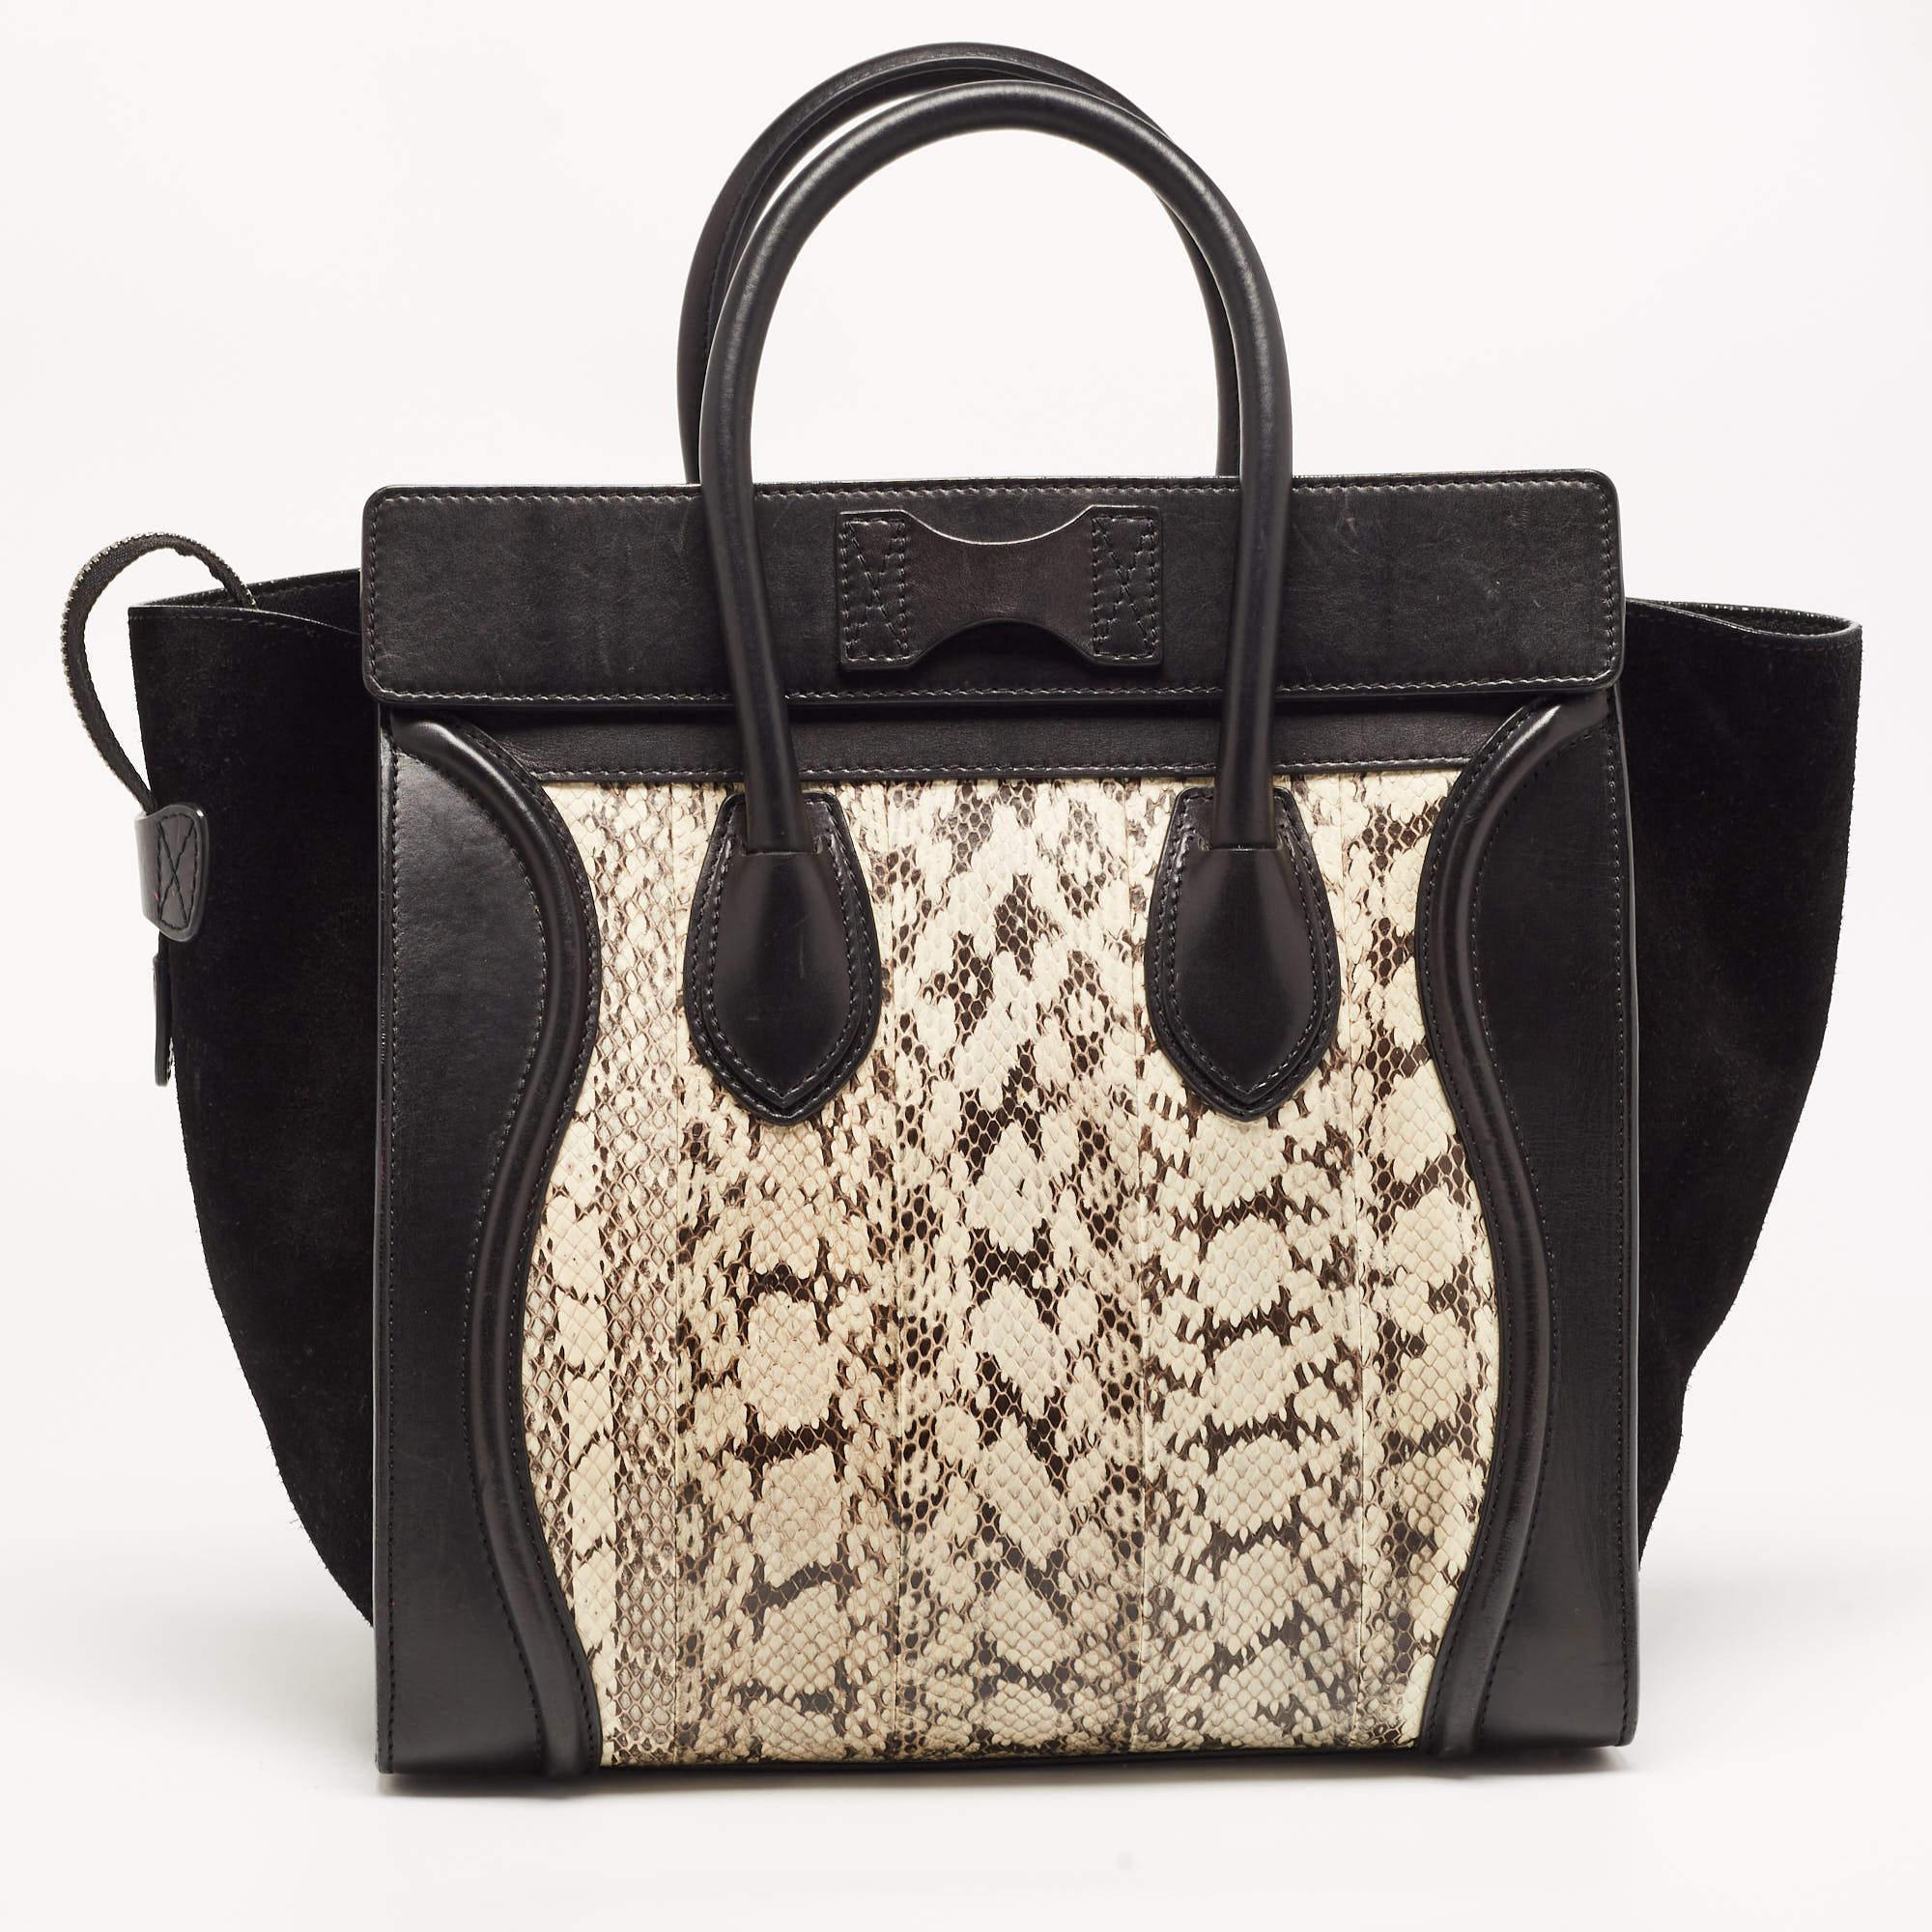 The usage of black & beige leather on the exterior gives this Celine tote a high appeal. An eye-catching accessory, the bag features a front zipper pocket, dual handles at the top, and grey-tone hardware. Its perfectly interior is equipped to store